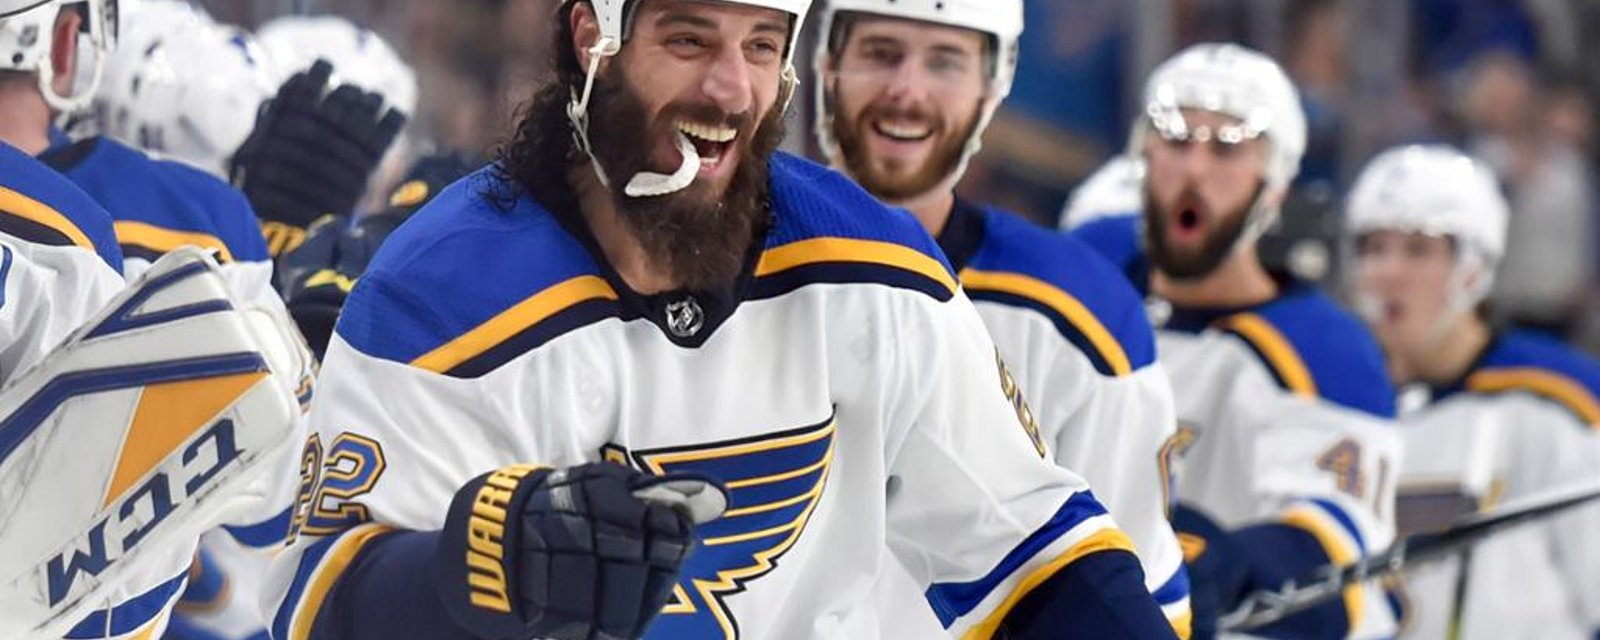 Chris Thorburn officially announces his retirement.